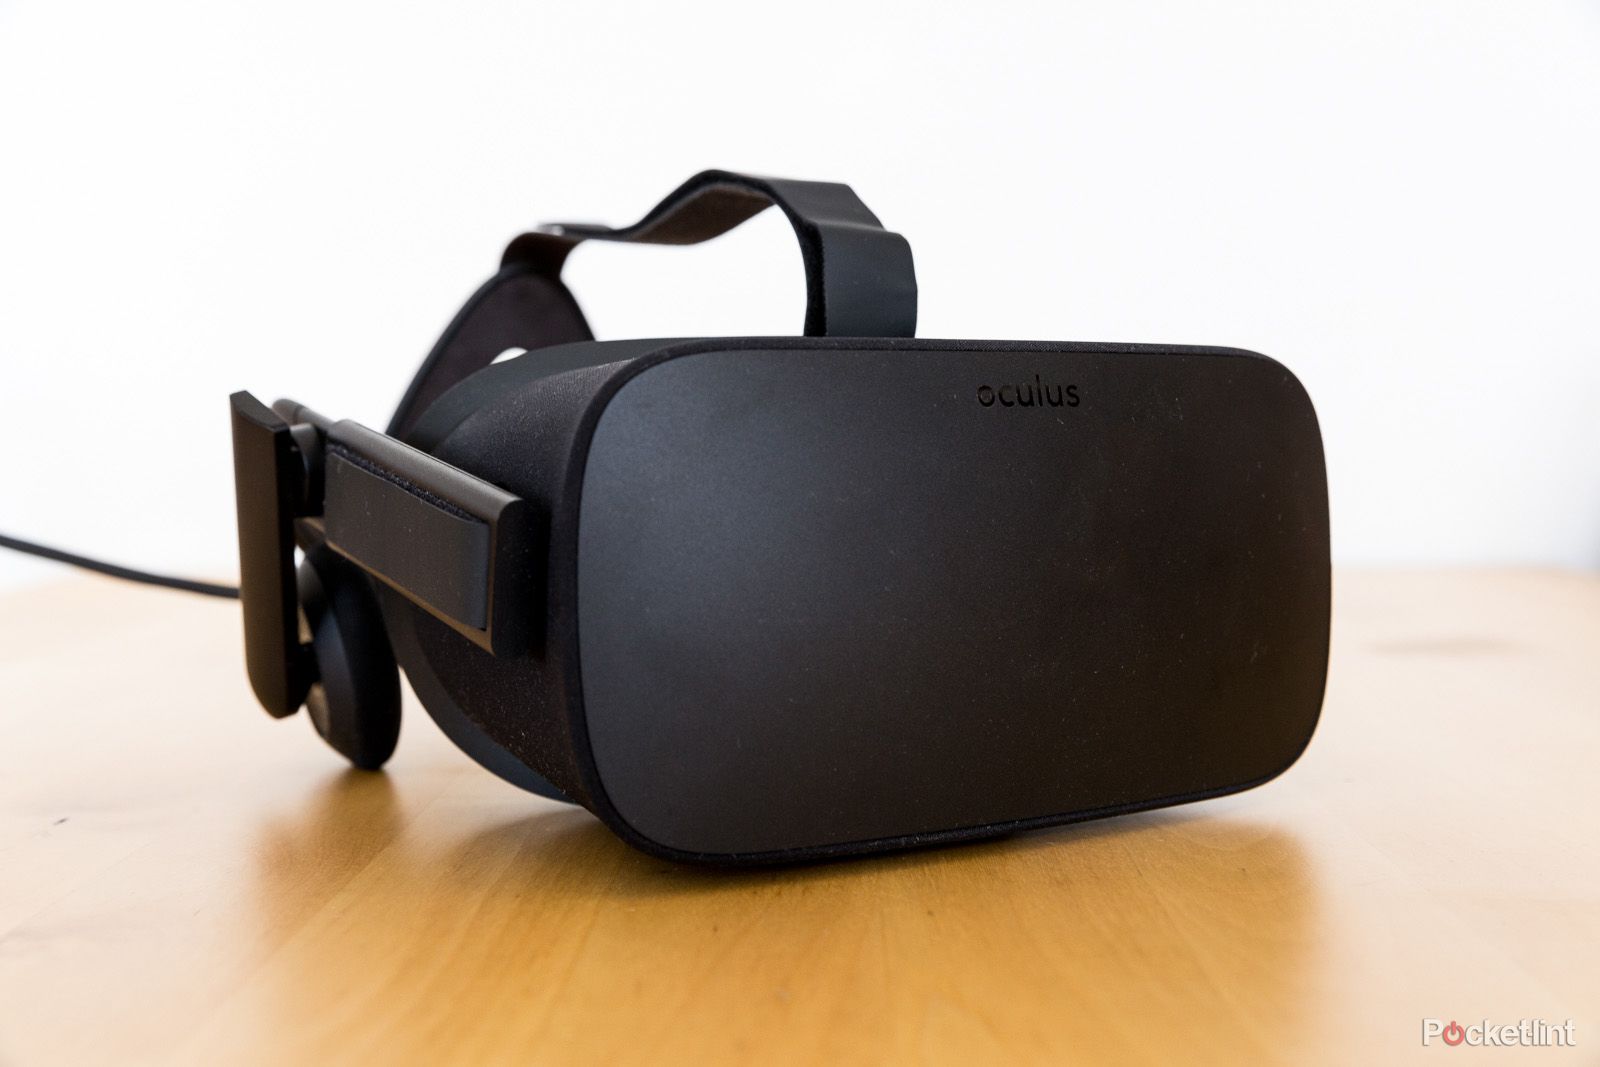 Oculus issues fix for security problem How to unbrick your Oculus Rift image 1